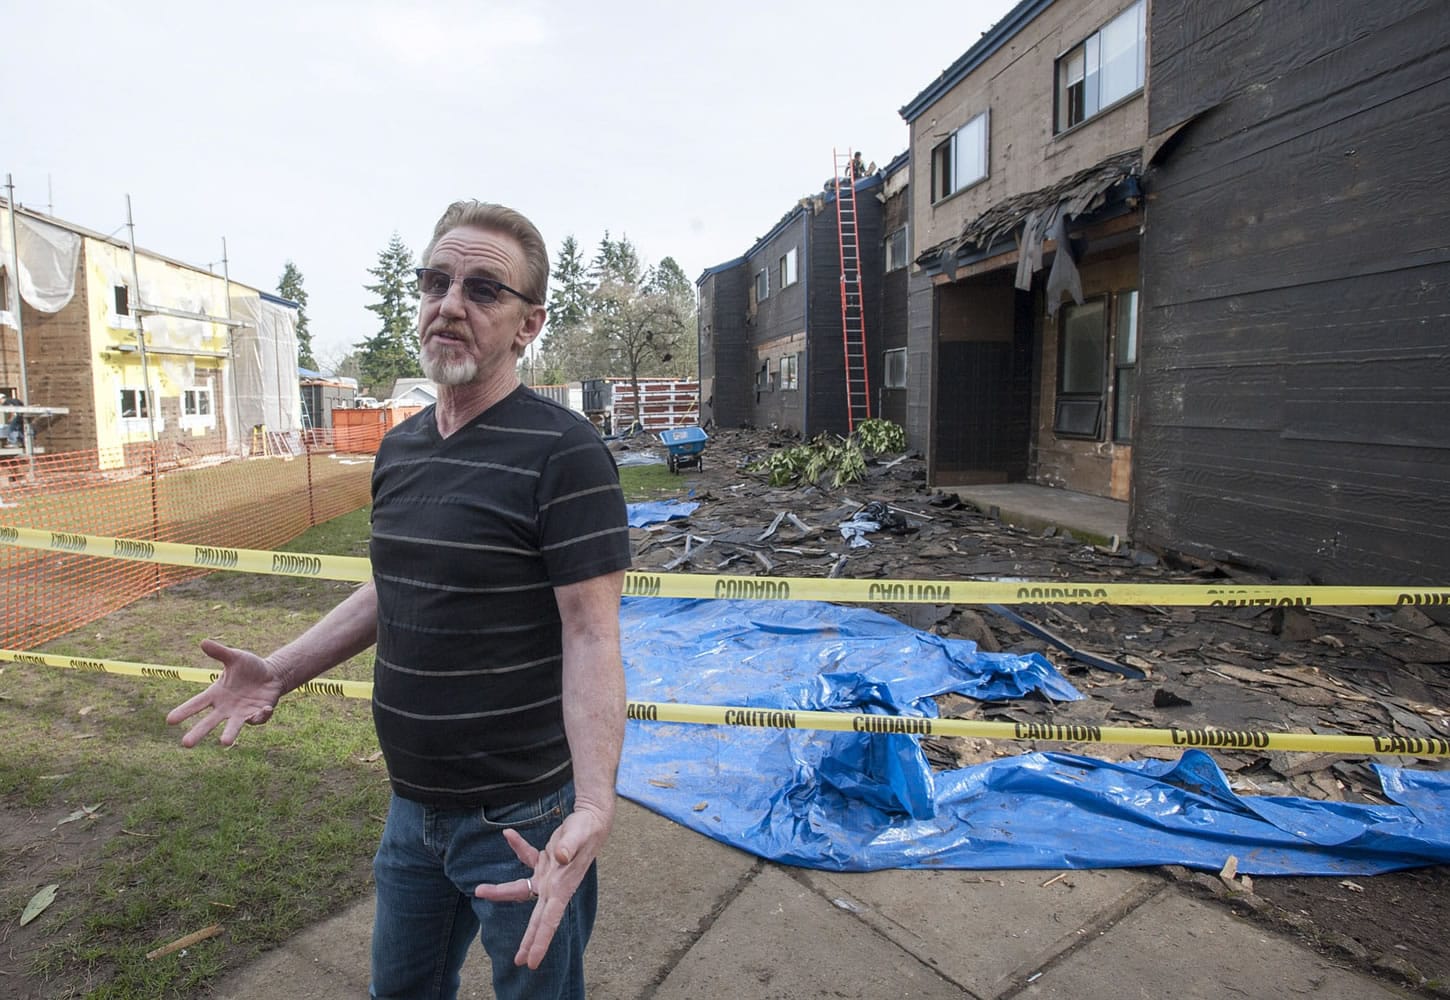 Kelly Britt, 56, is facing an end-of-February deadline to move himself, his wife and their two daughters out of the Courtyard Village Apartments, where renovations are now underway.